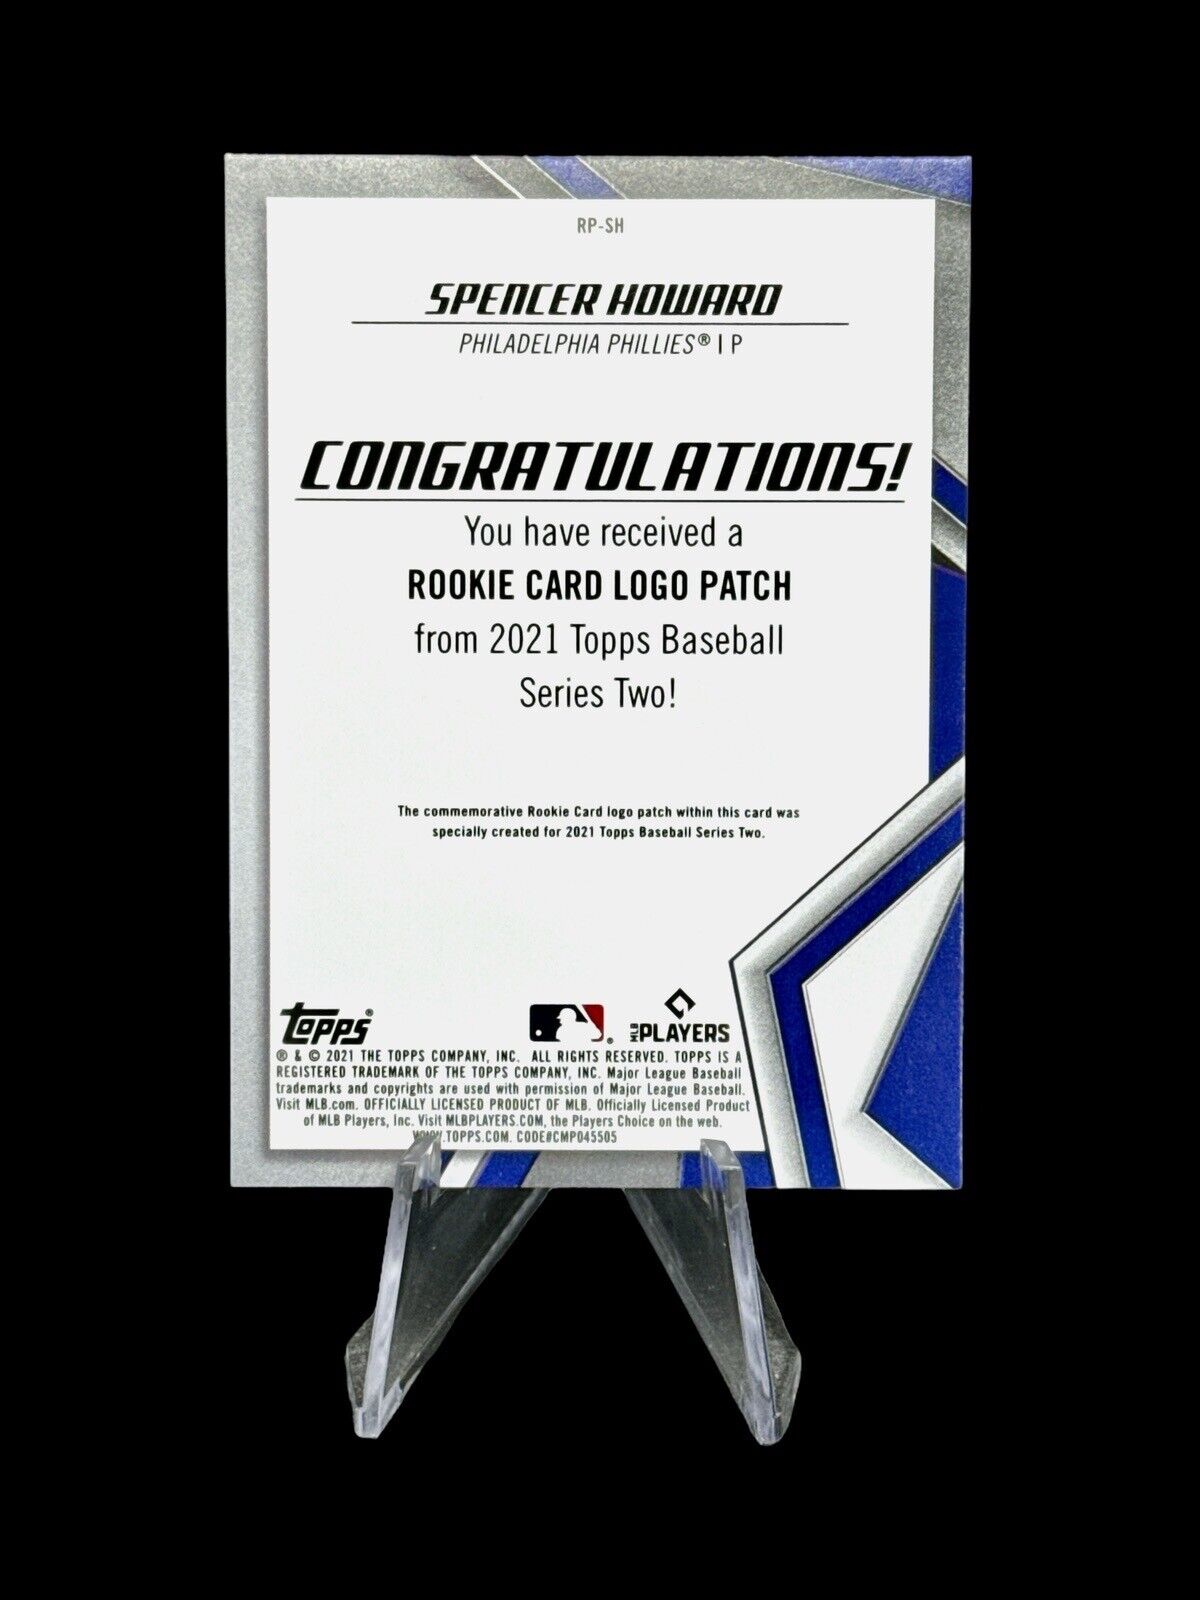 2021 Topps Series 2 Spencer Howard RC Rookie Logo Patch (RP-SH)